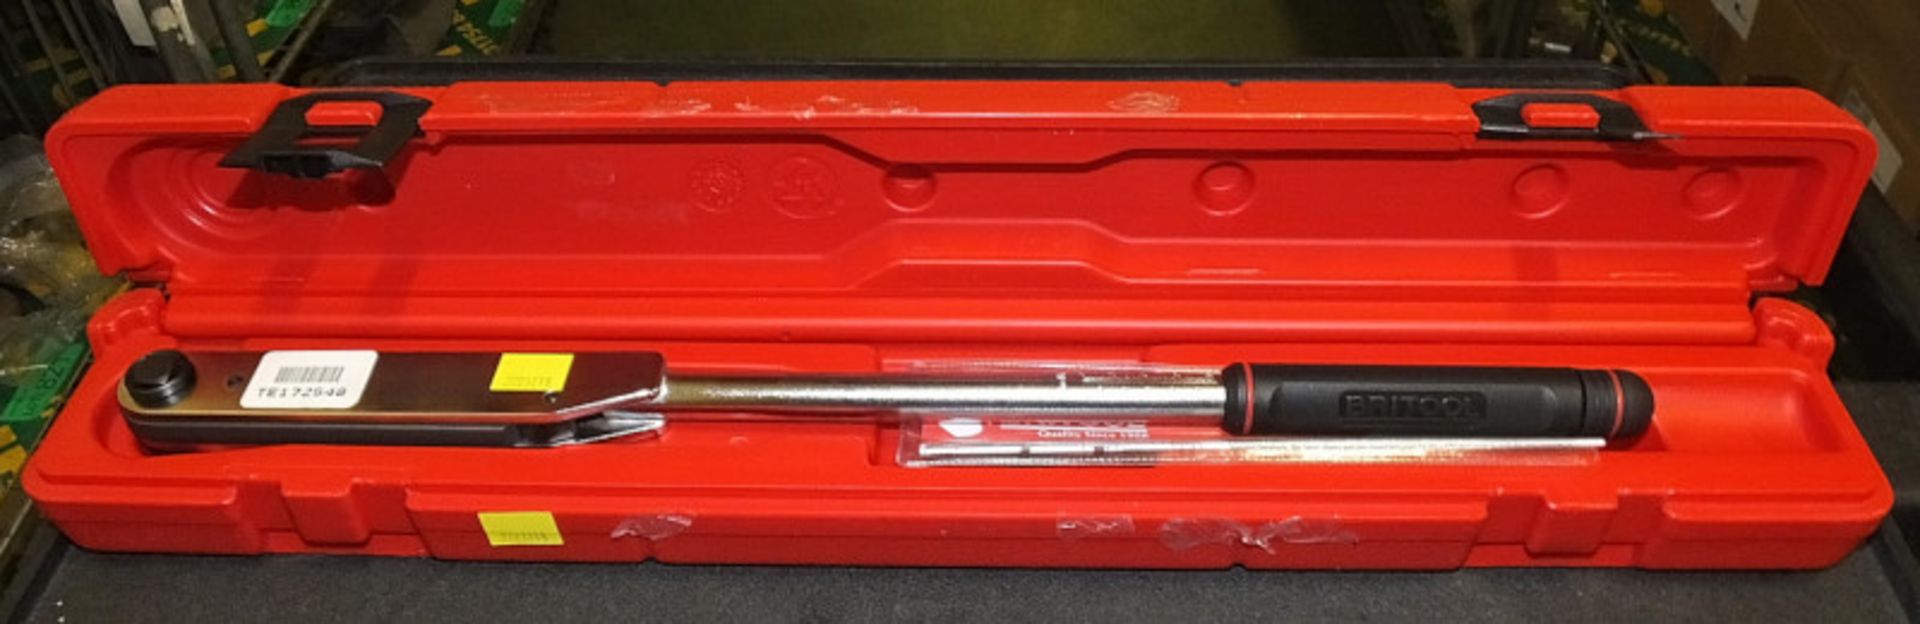 Britool EVT 600A Torque Wrench 12-68Nm with case